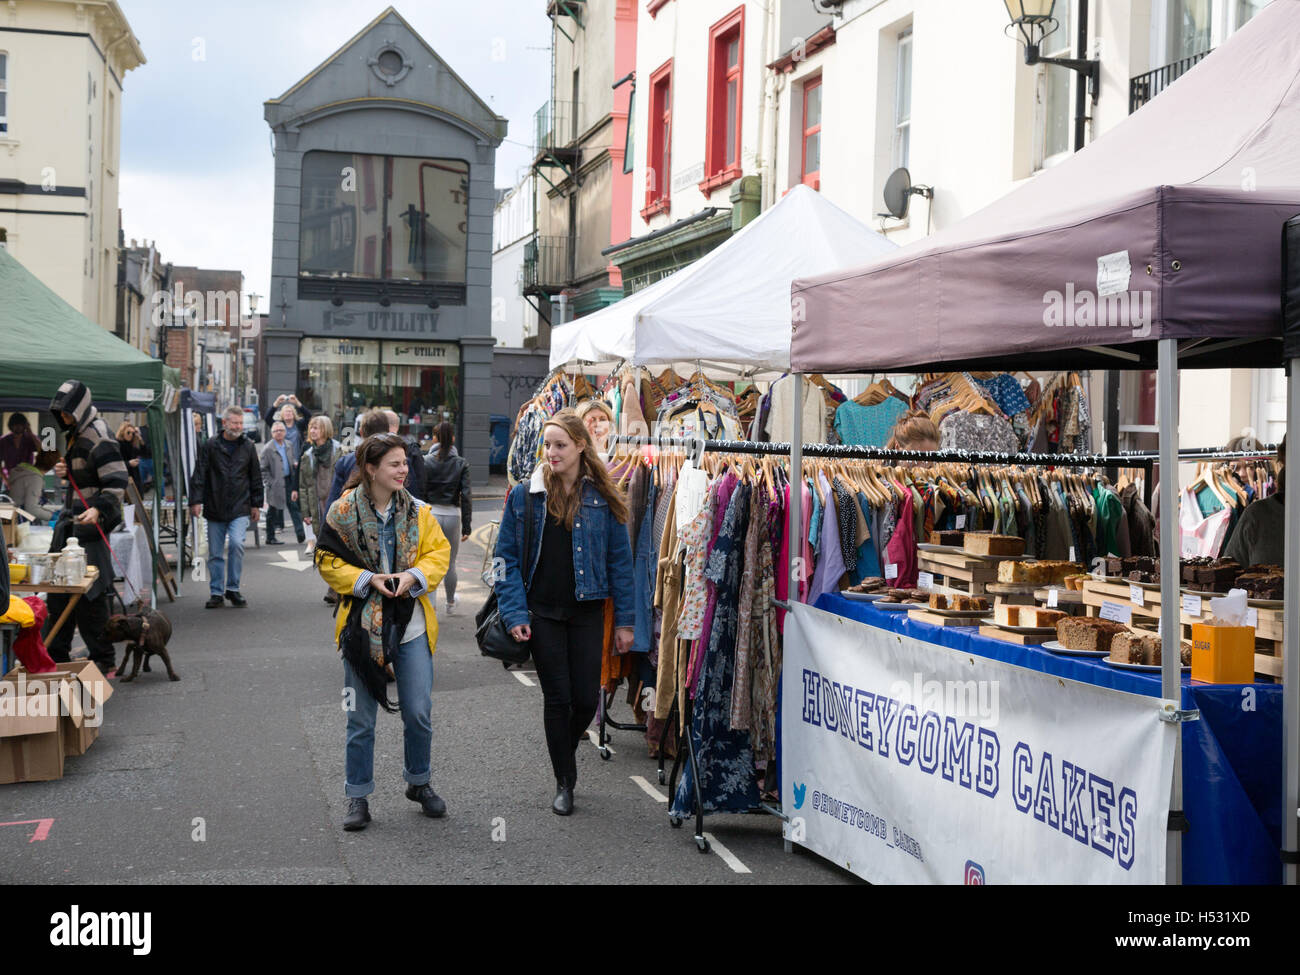 People shopping in the street market, the Lanes, Brighton, East Sussex, UK Stock Photo